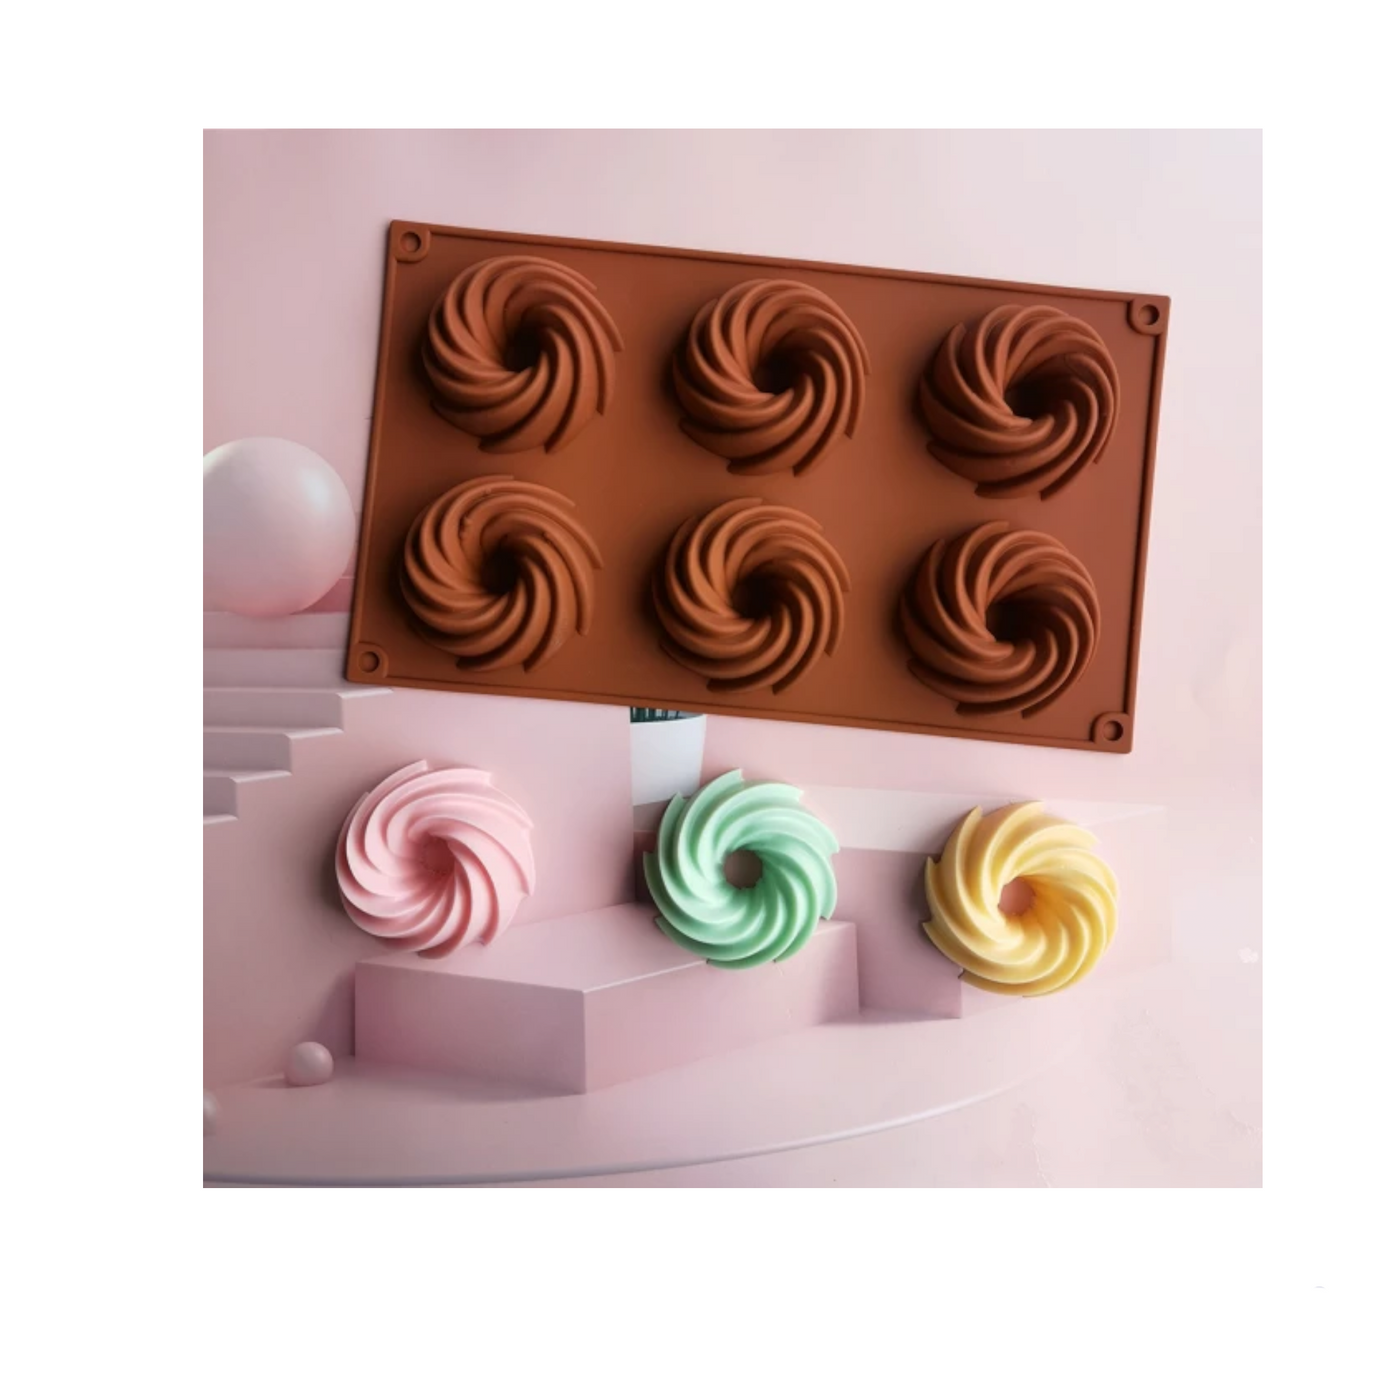 Molds for Baking - Chocolate Candy Molds Silicone Molds for Spiral Silicone